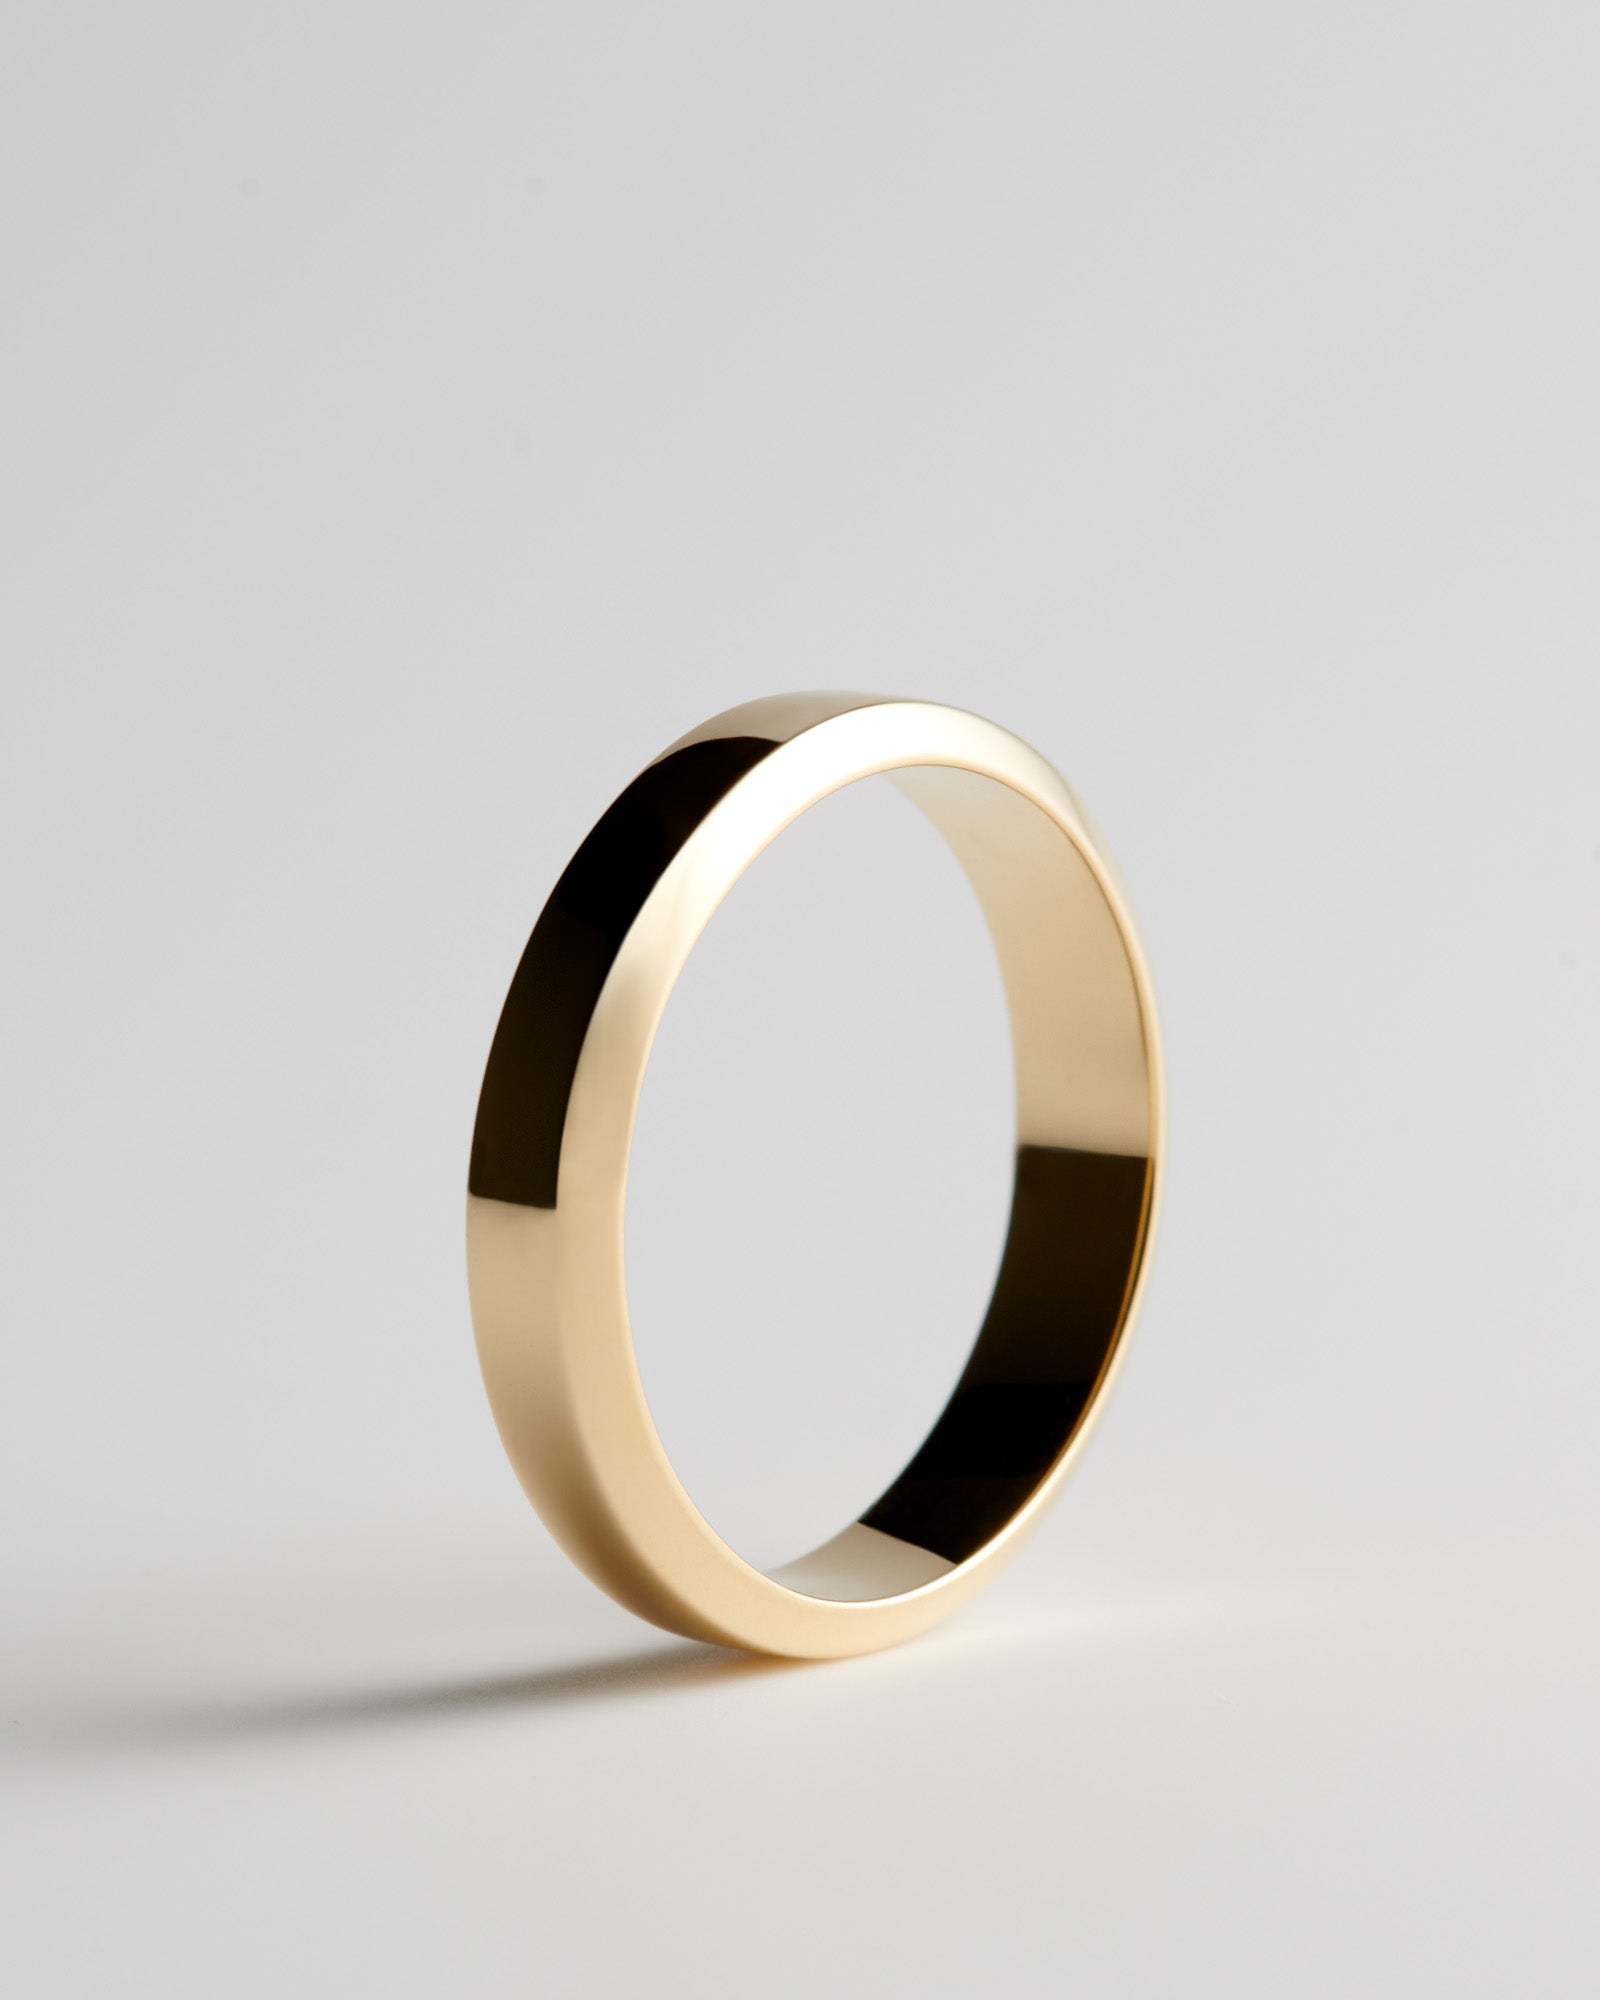 The Song ring